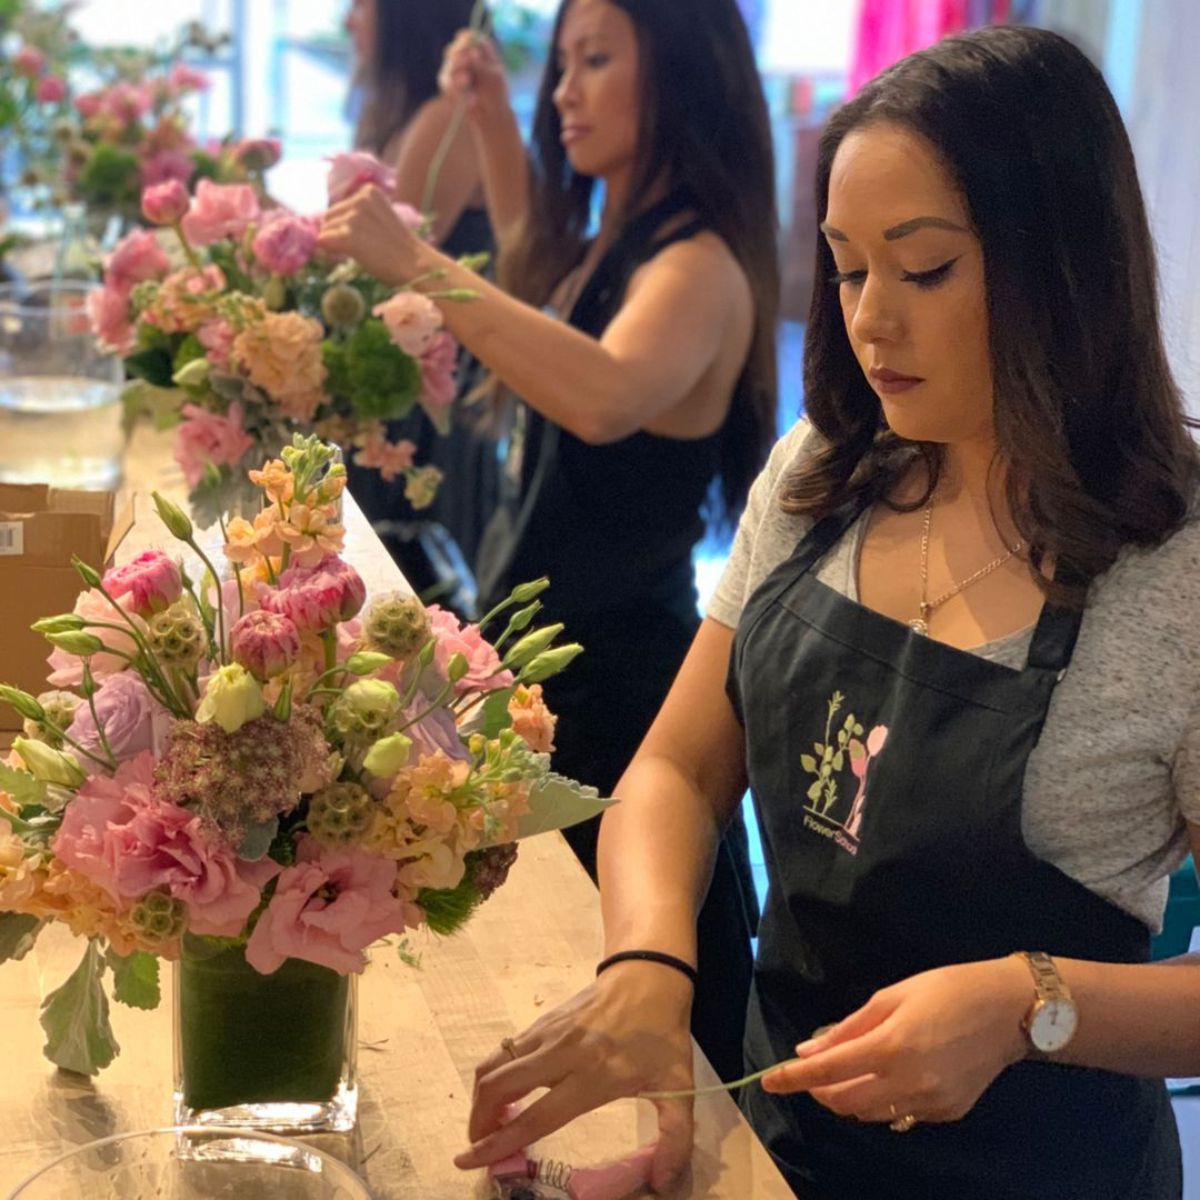 Flowerschool NYC offers courses and certifications